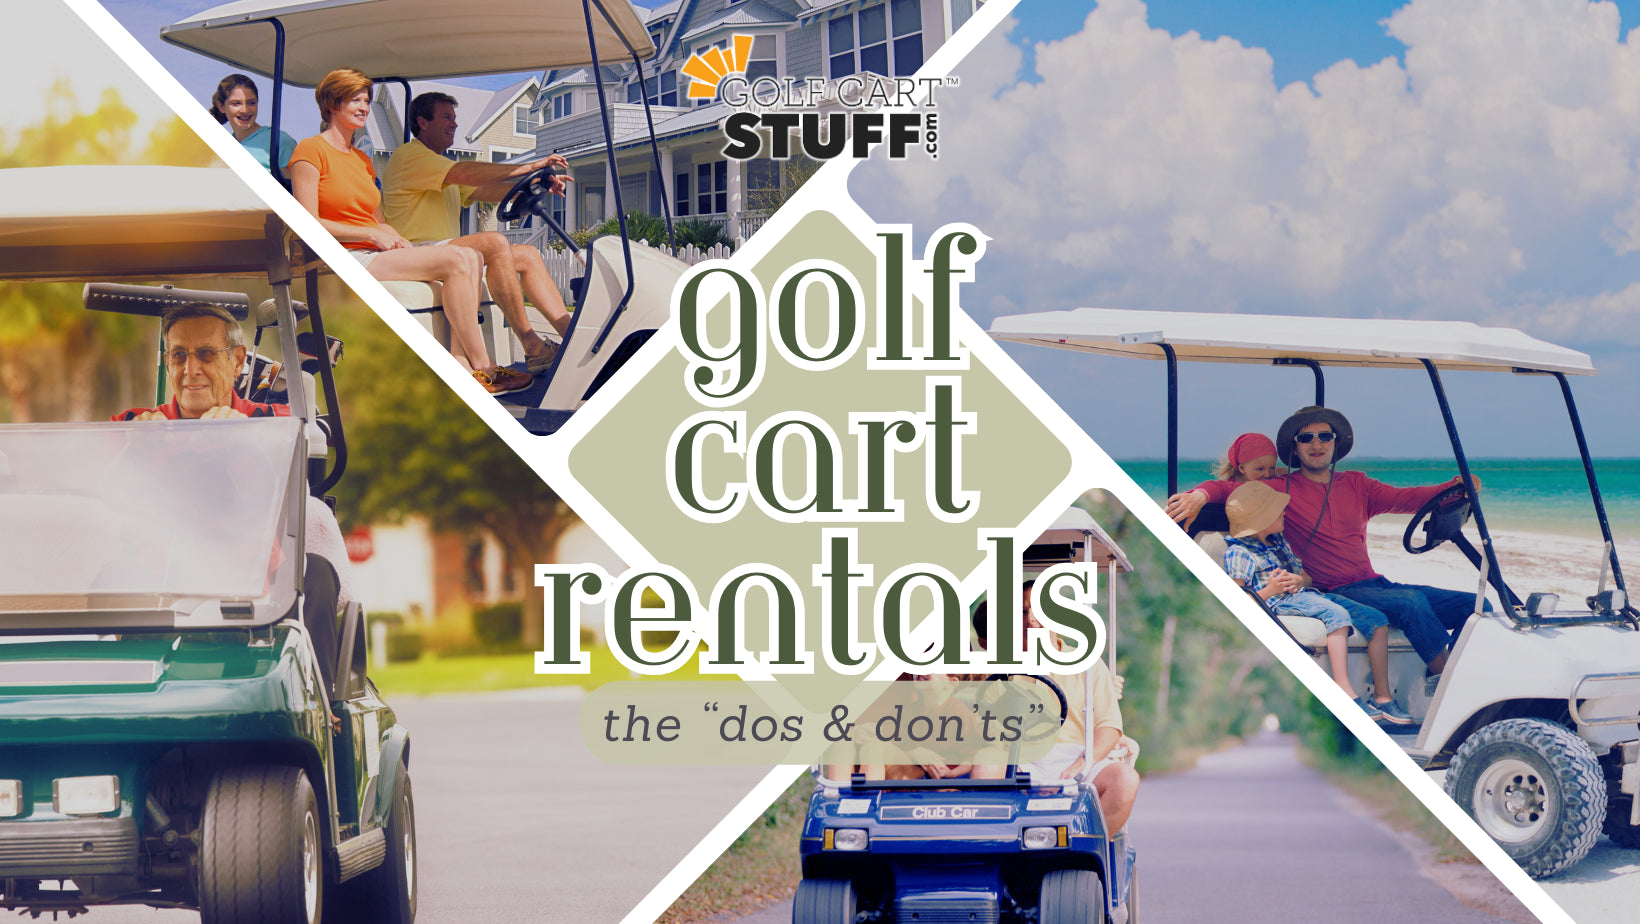 Golf Cart Rental Tips for Your Next Vacation: Dos and Don'ts